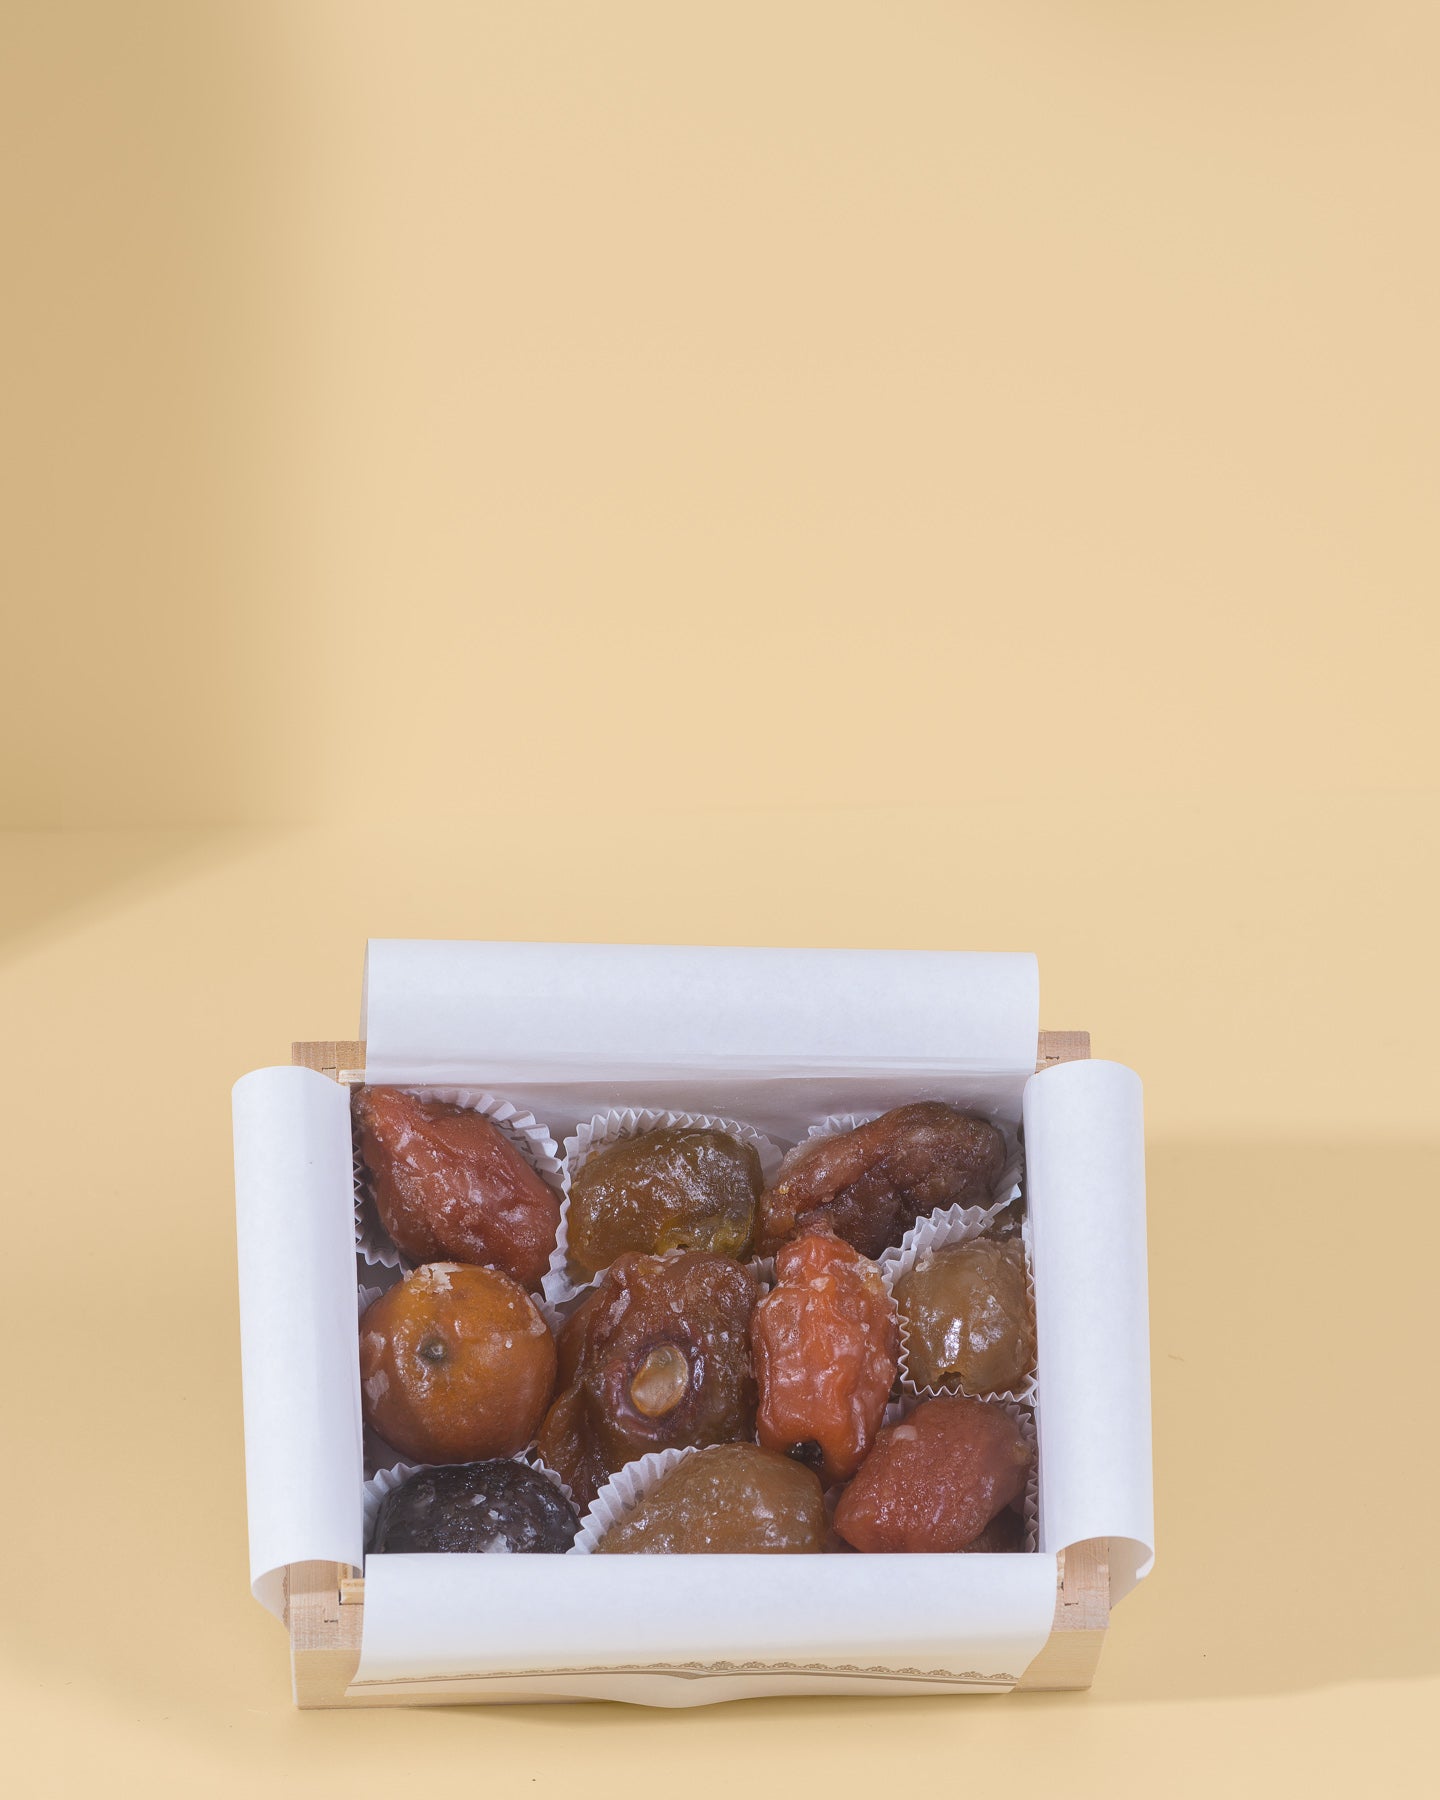 Wooden box of iced candied fruit